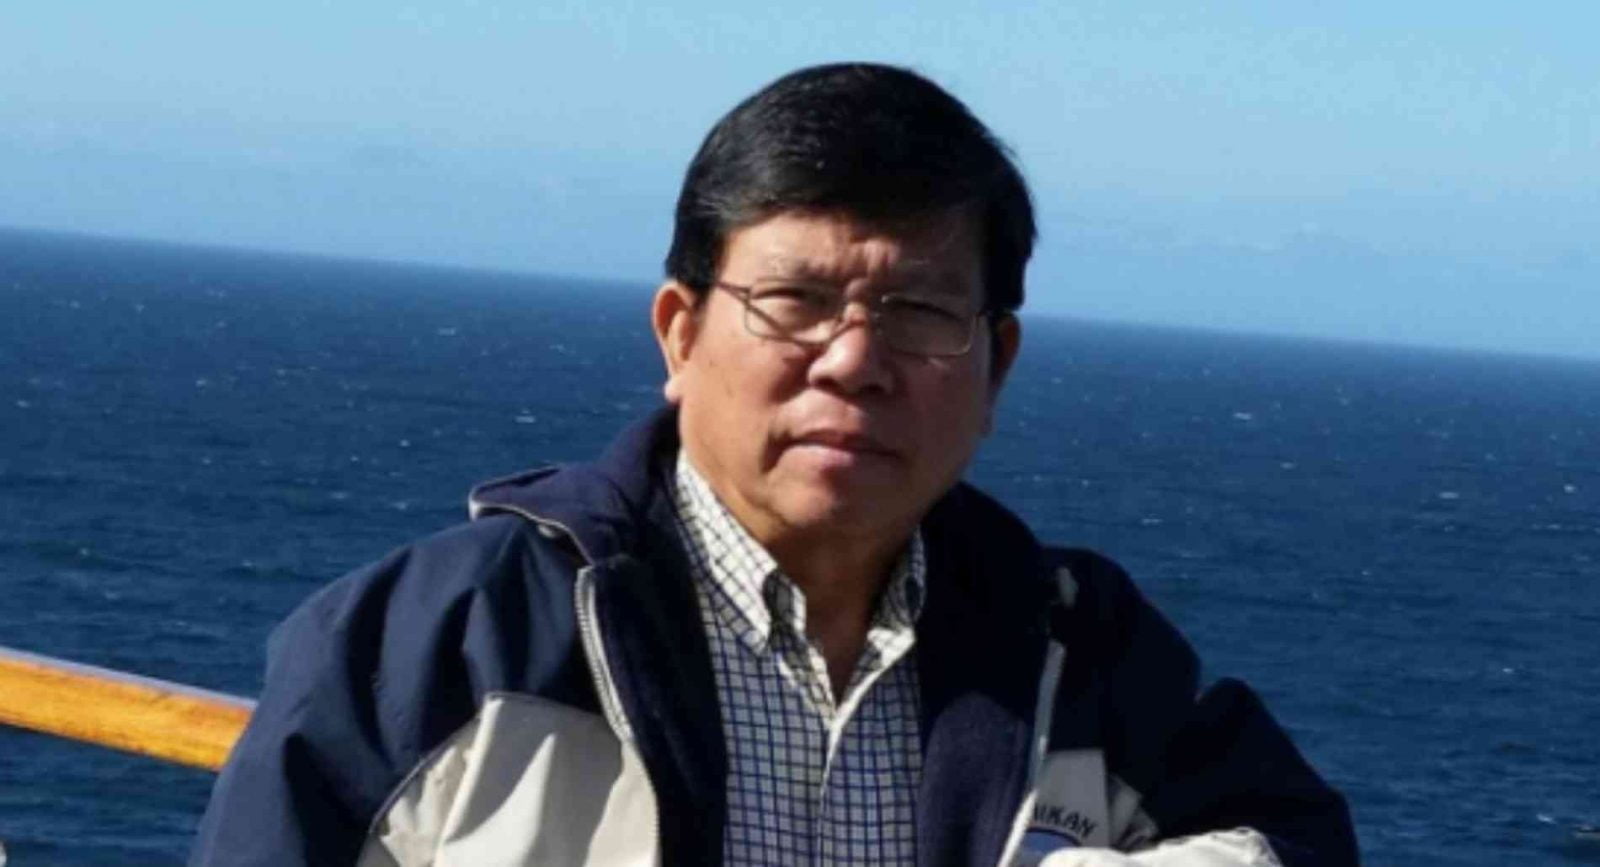 Mr Chau wears a jacket and glasses, and stands in front of the ocean.